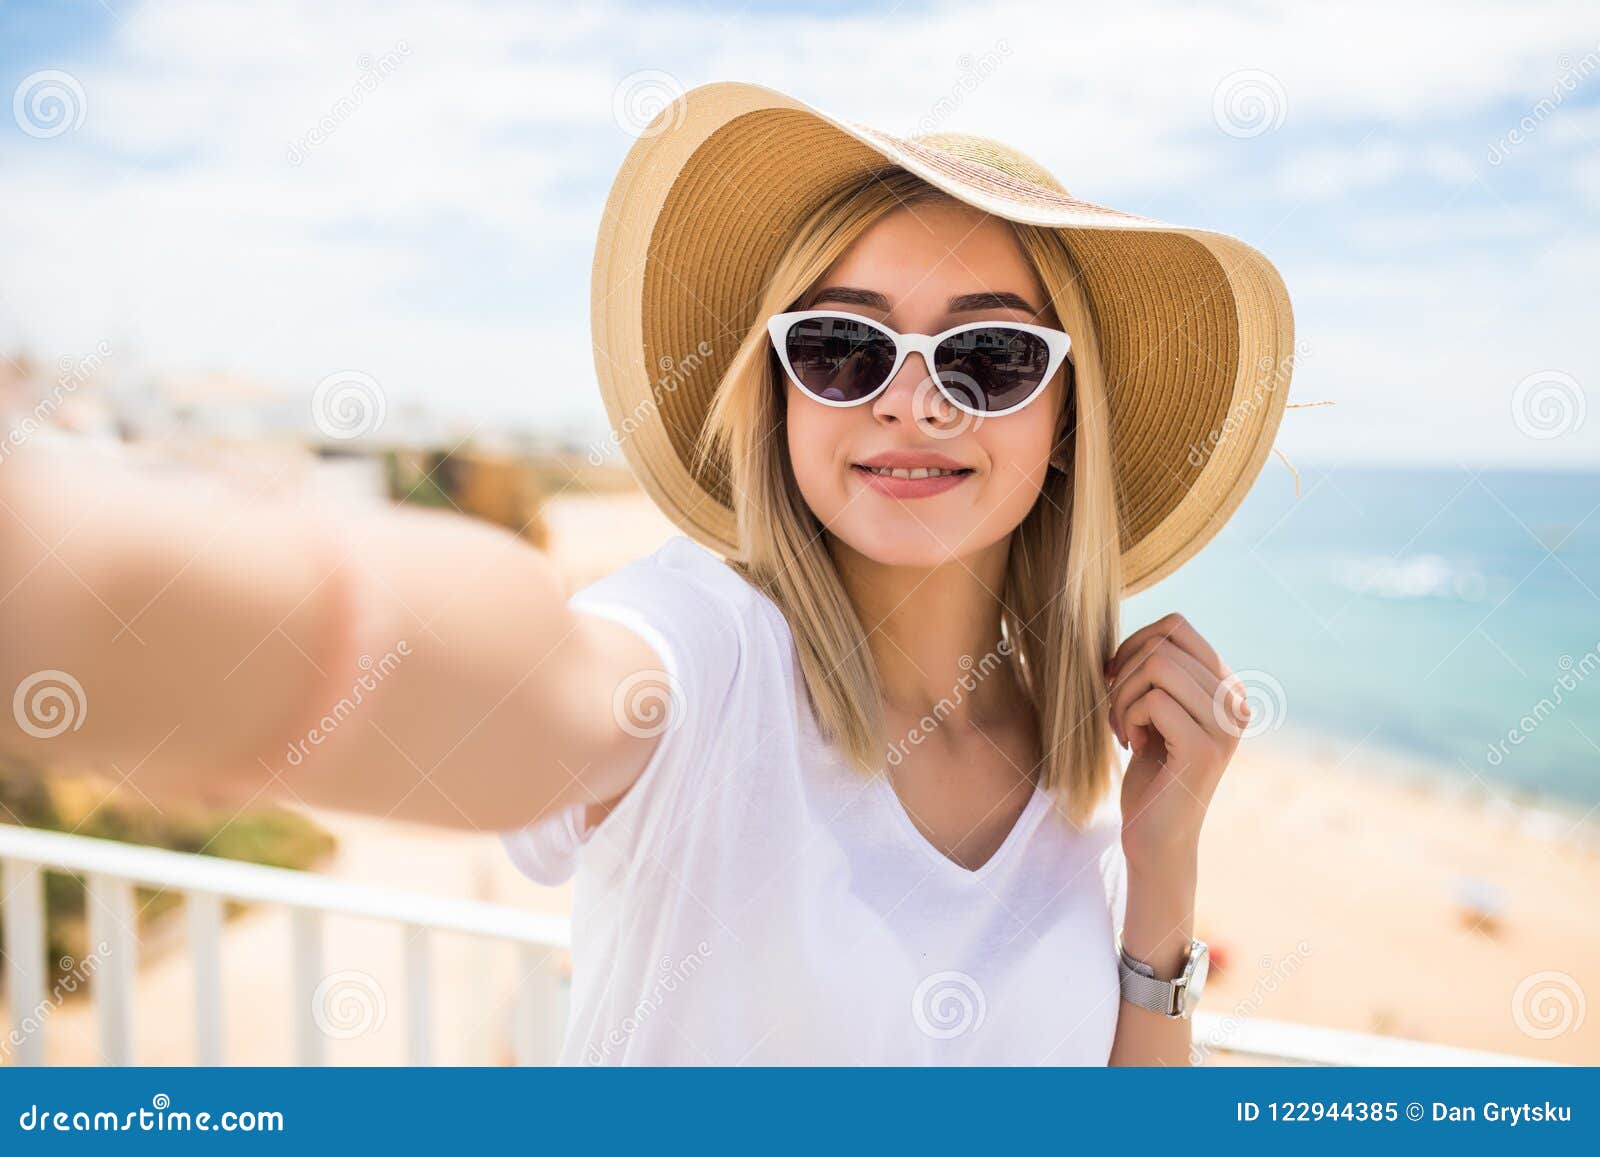 Beautiful Woman In Sunglasses And Summer Hat Taking Selfie On Beach Stock Image Image Of